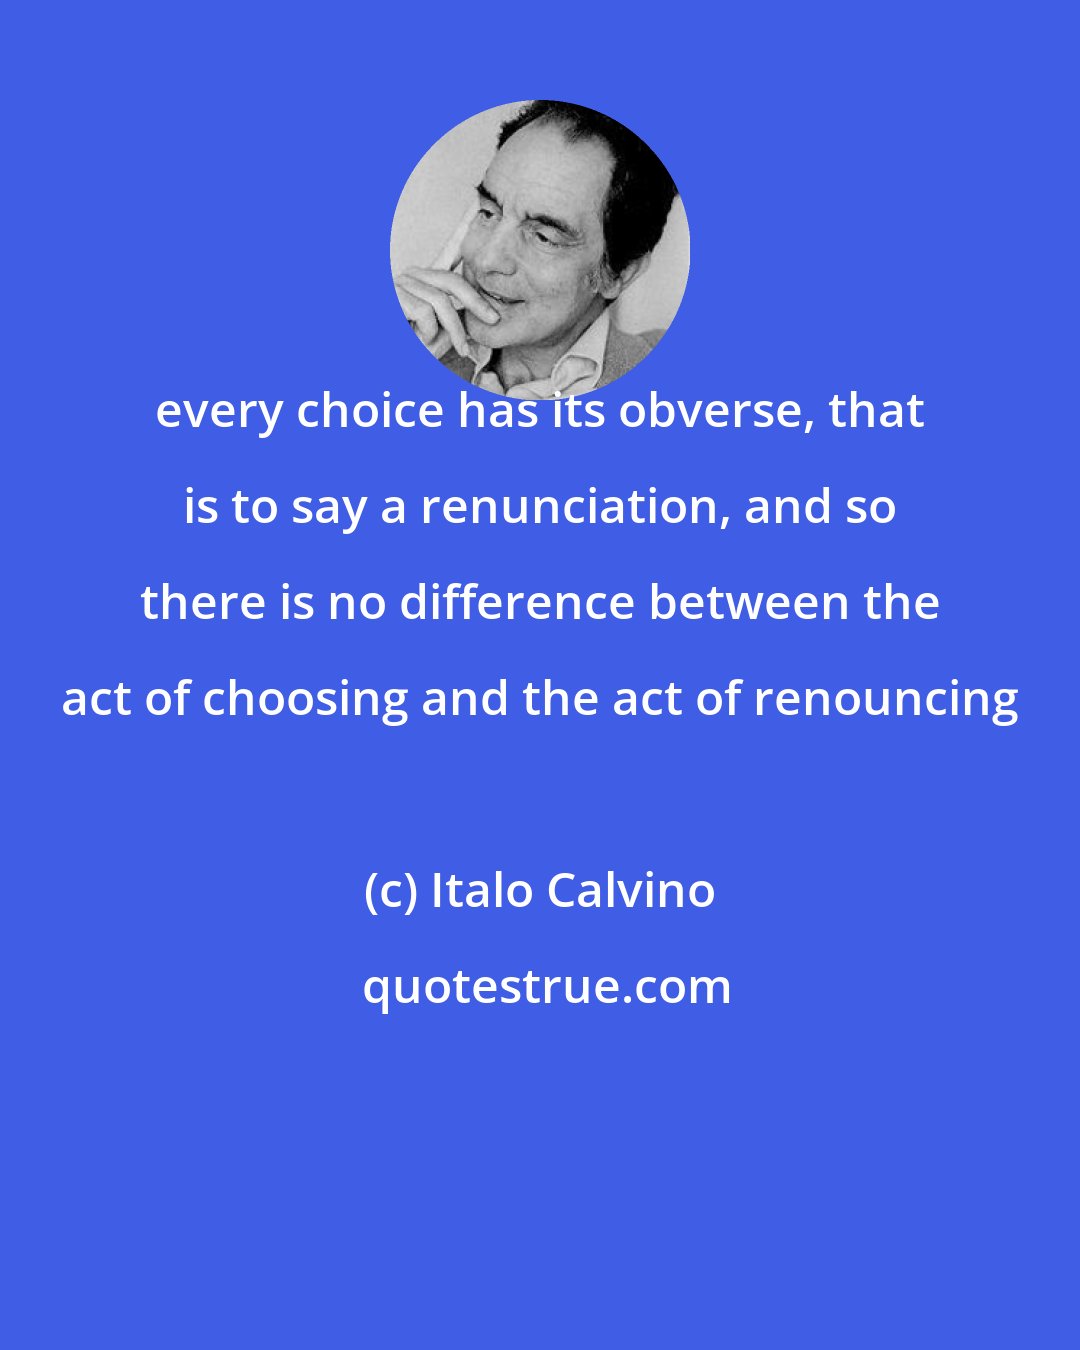 Italo Calvino: every choice has its obverse, that is to say a renunciation, and so there is no difference between the act of choosing and the act of renouncing